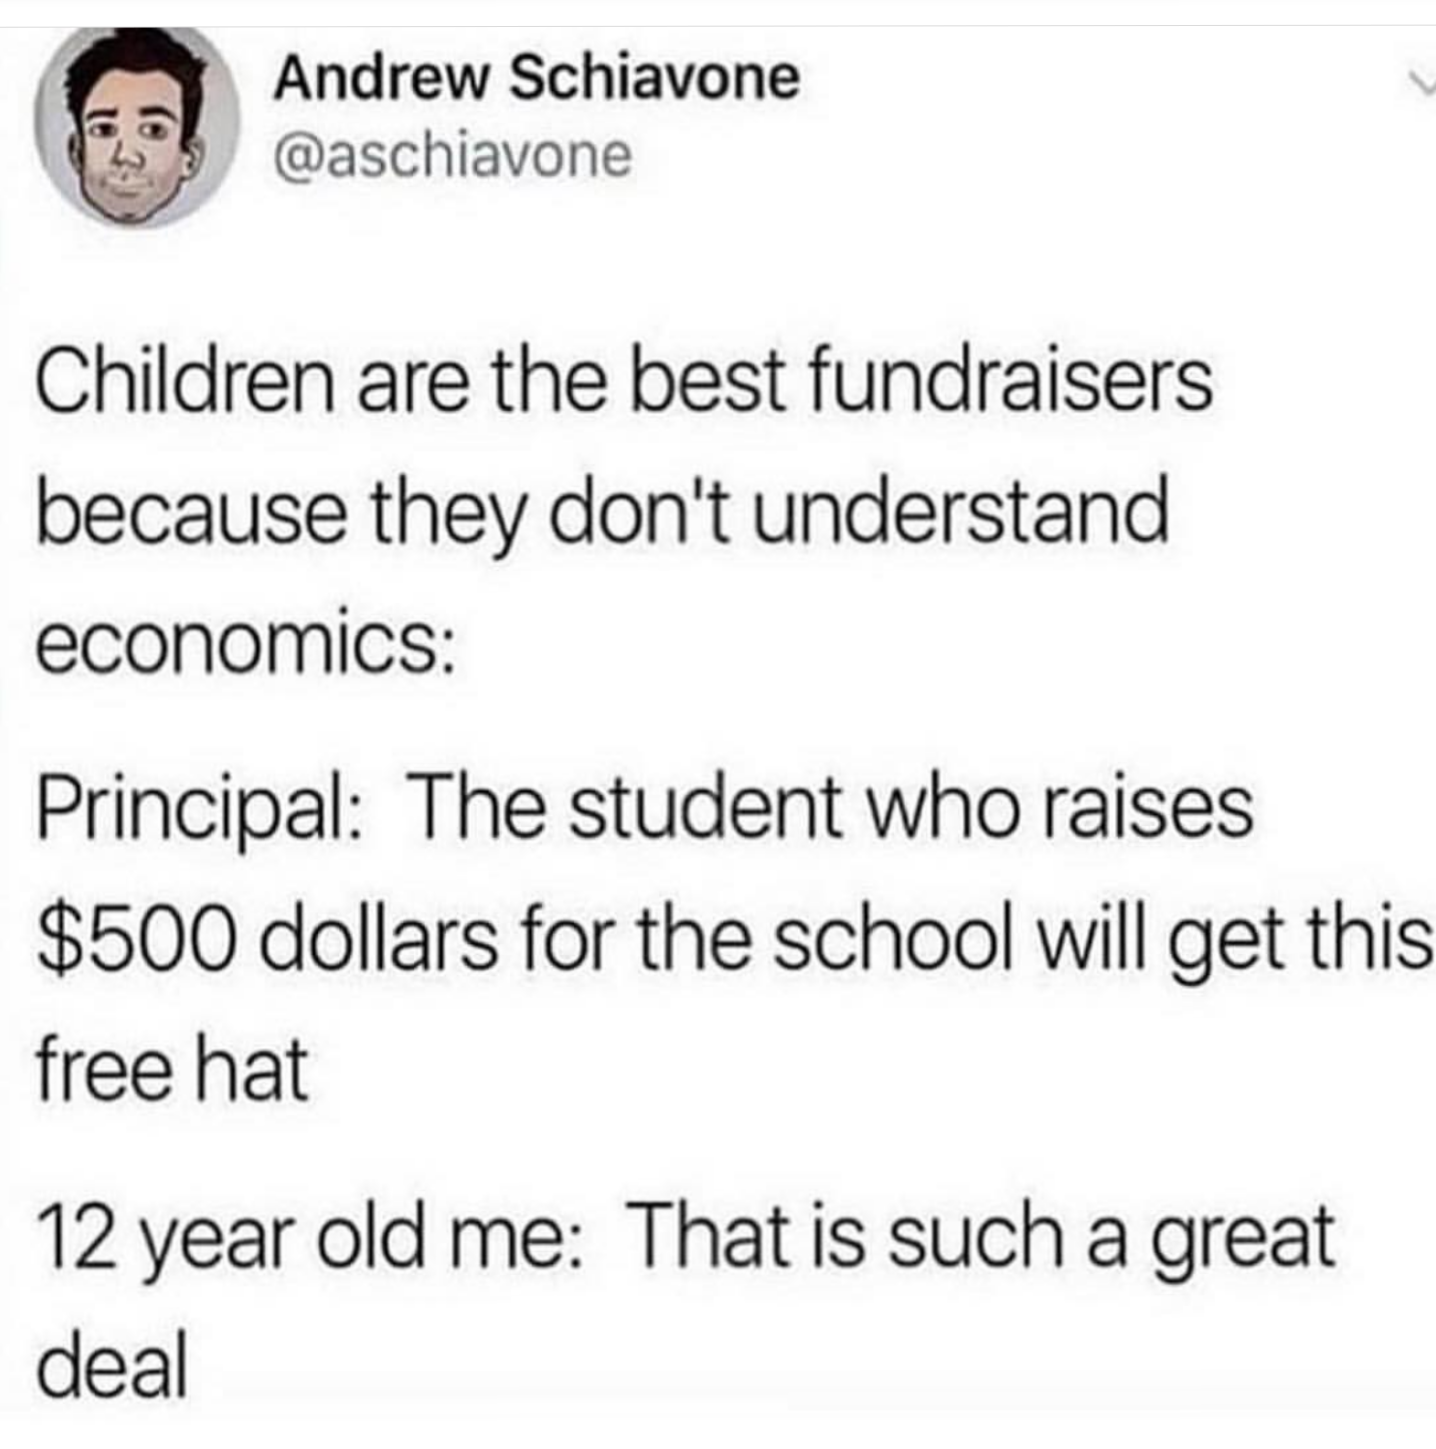 face mask meme - Andrew Schiavone Children are the best fundraisers because they don't understand economics Principal The student who raises $500 dollars for the school will get this free hat 12 year old me That is such a great deal